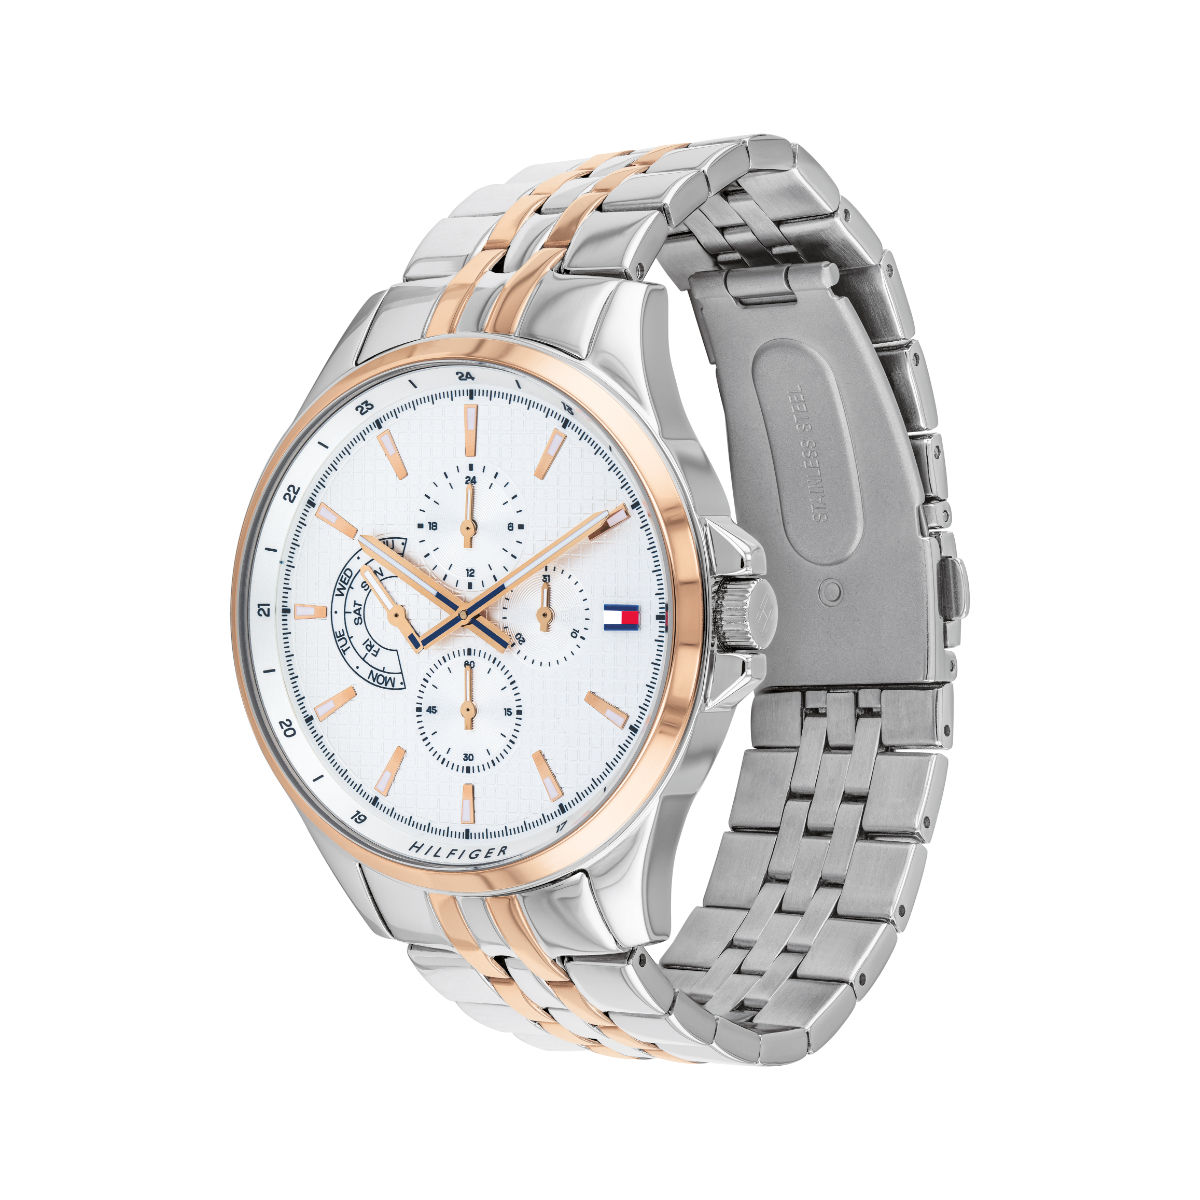 Tommy Hilfiger TH1791617 White Dial Analog Watch For Men: Buy Tommy ...